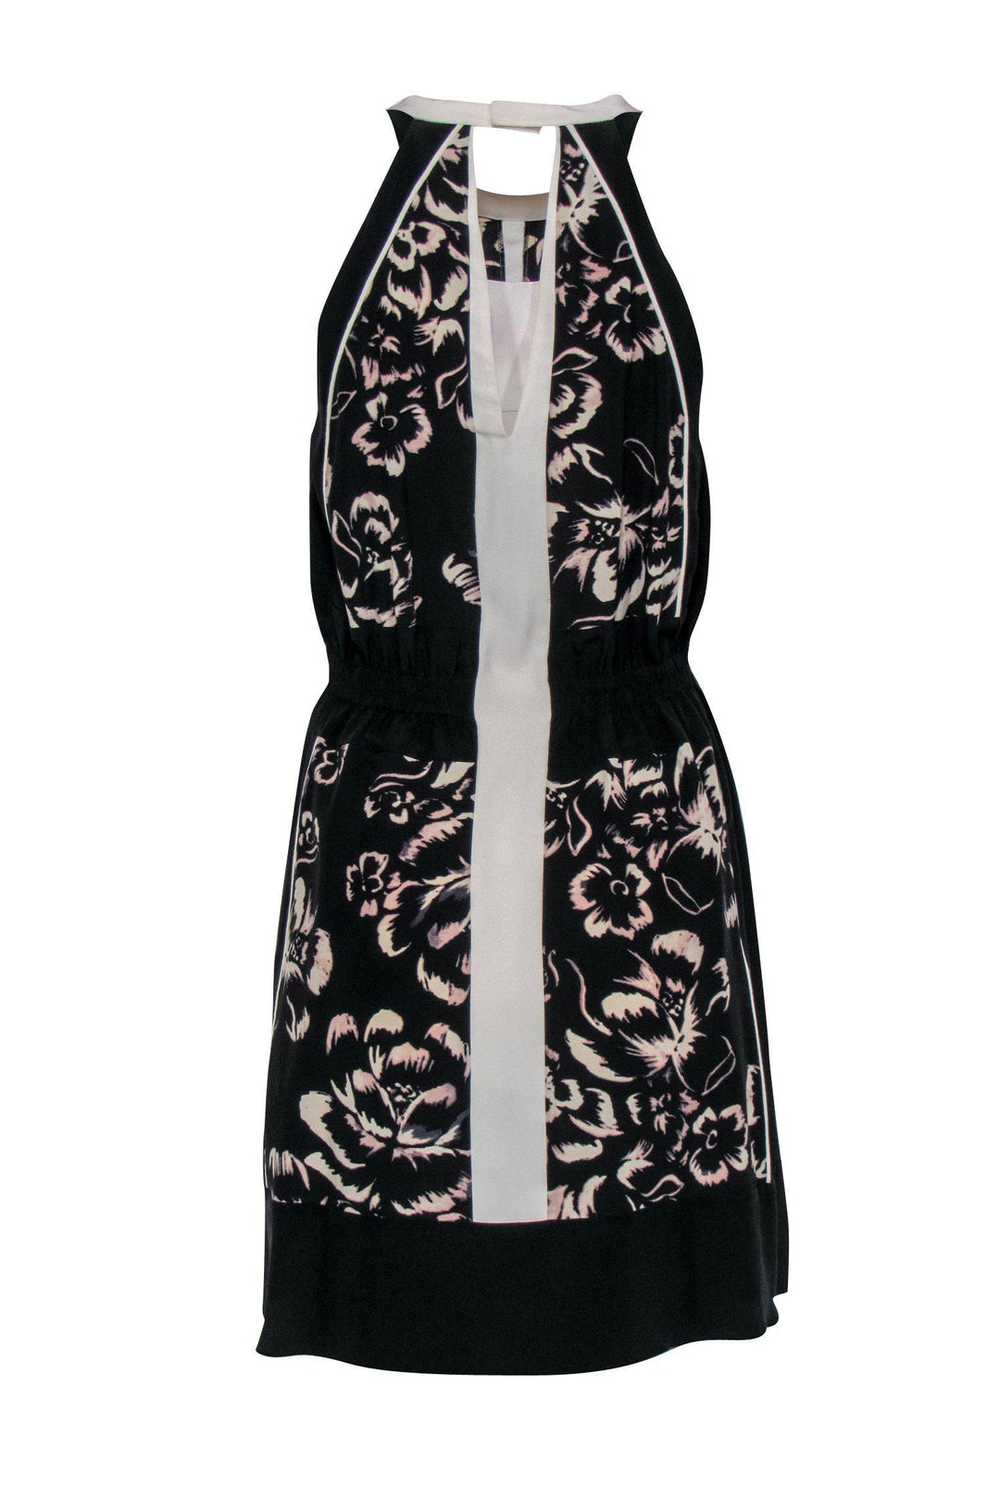 Rebecca Taylor - Black & White Silk Fitted Dress … - image 3